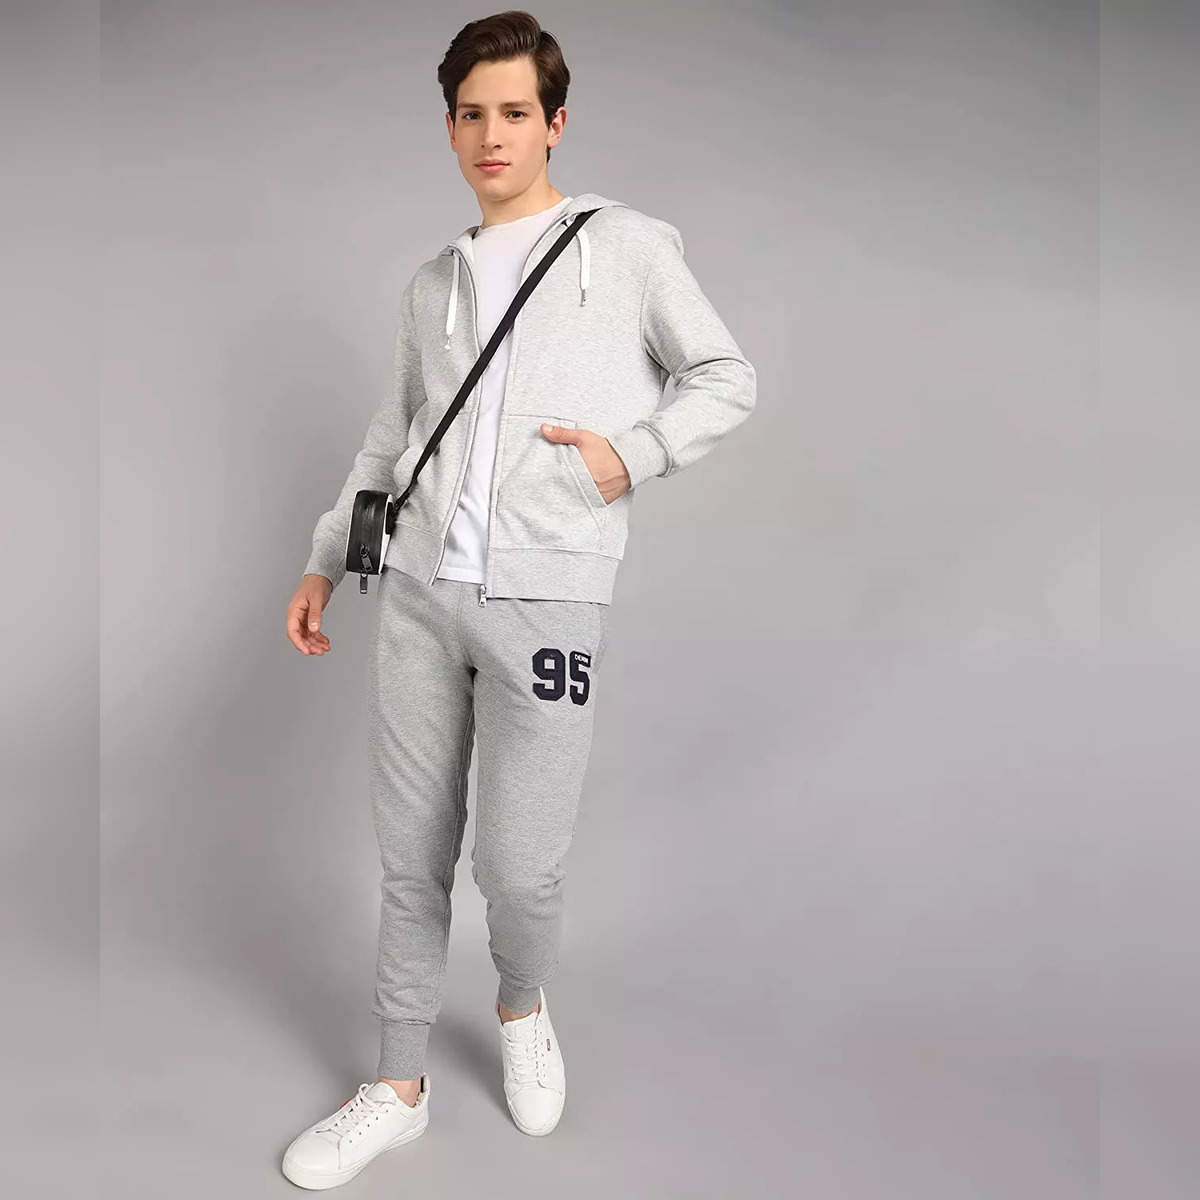 I Love MY BOYFRIEND Printed Trousers Casual Sweatpants Men And